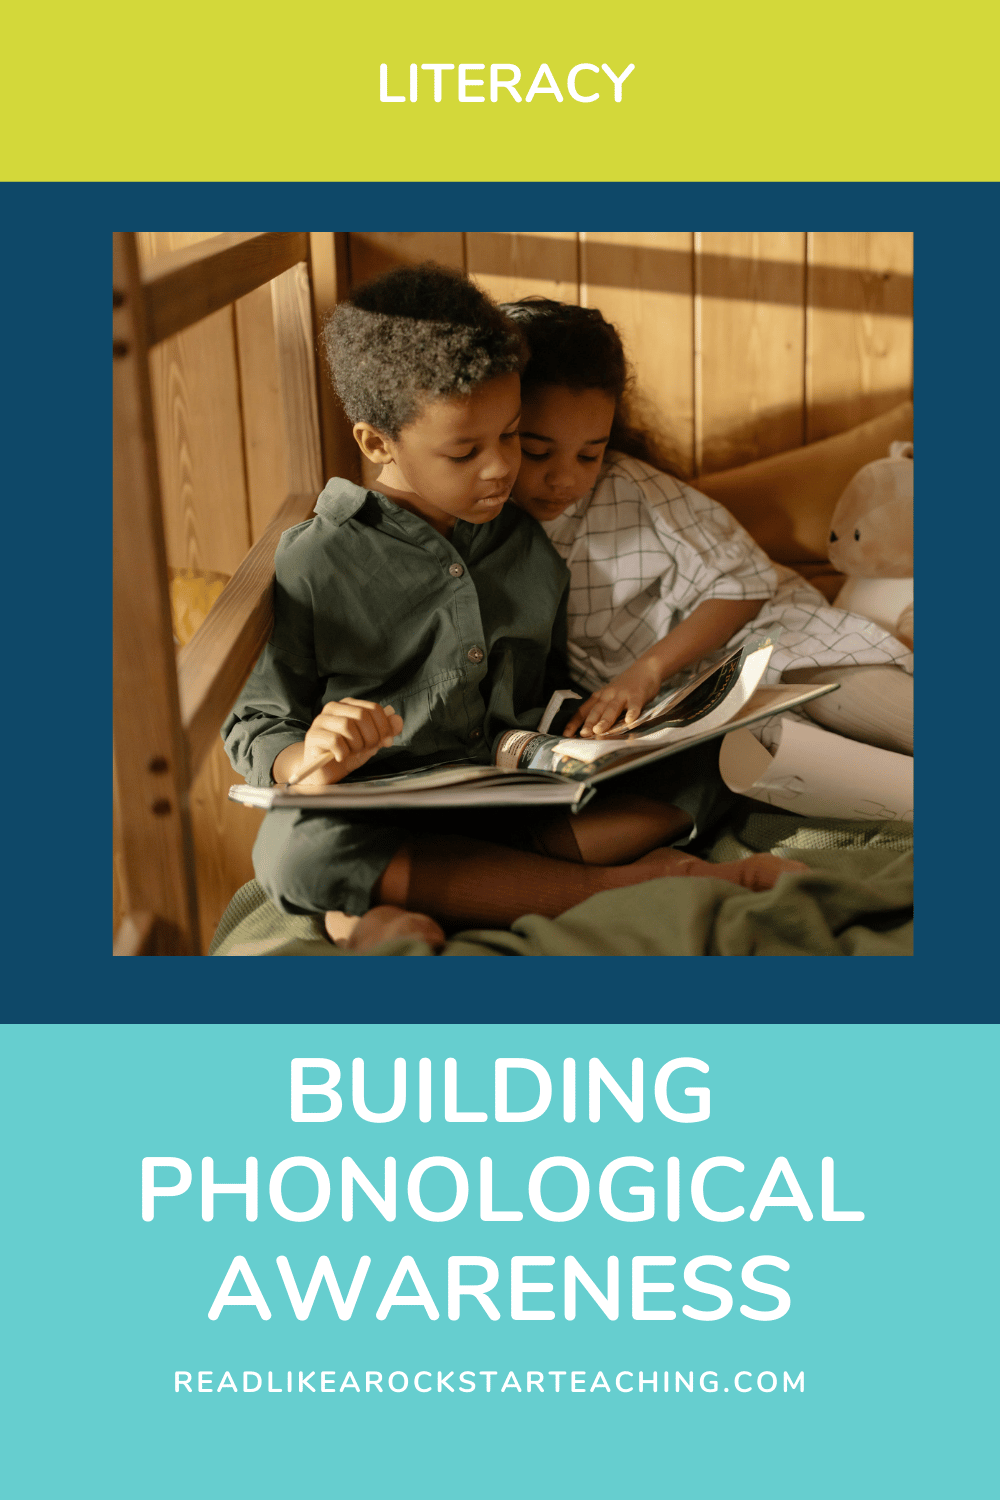 Phonological Awareness Explained